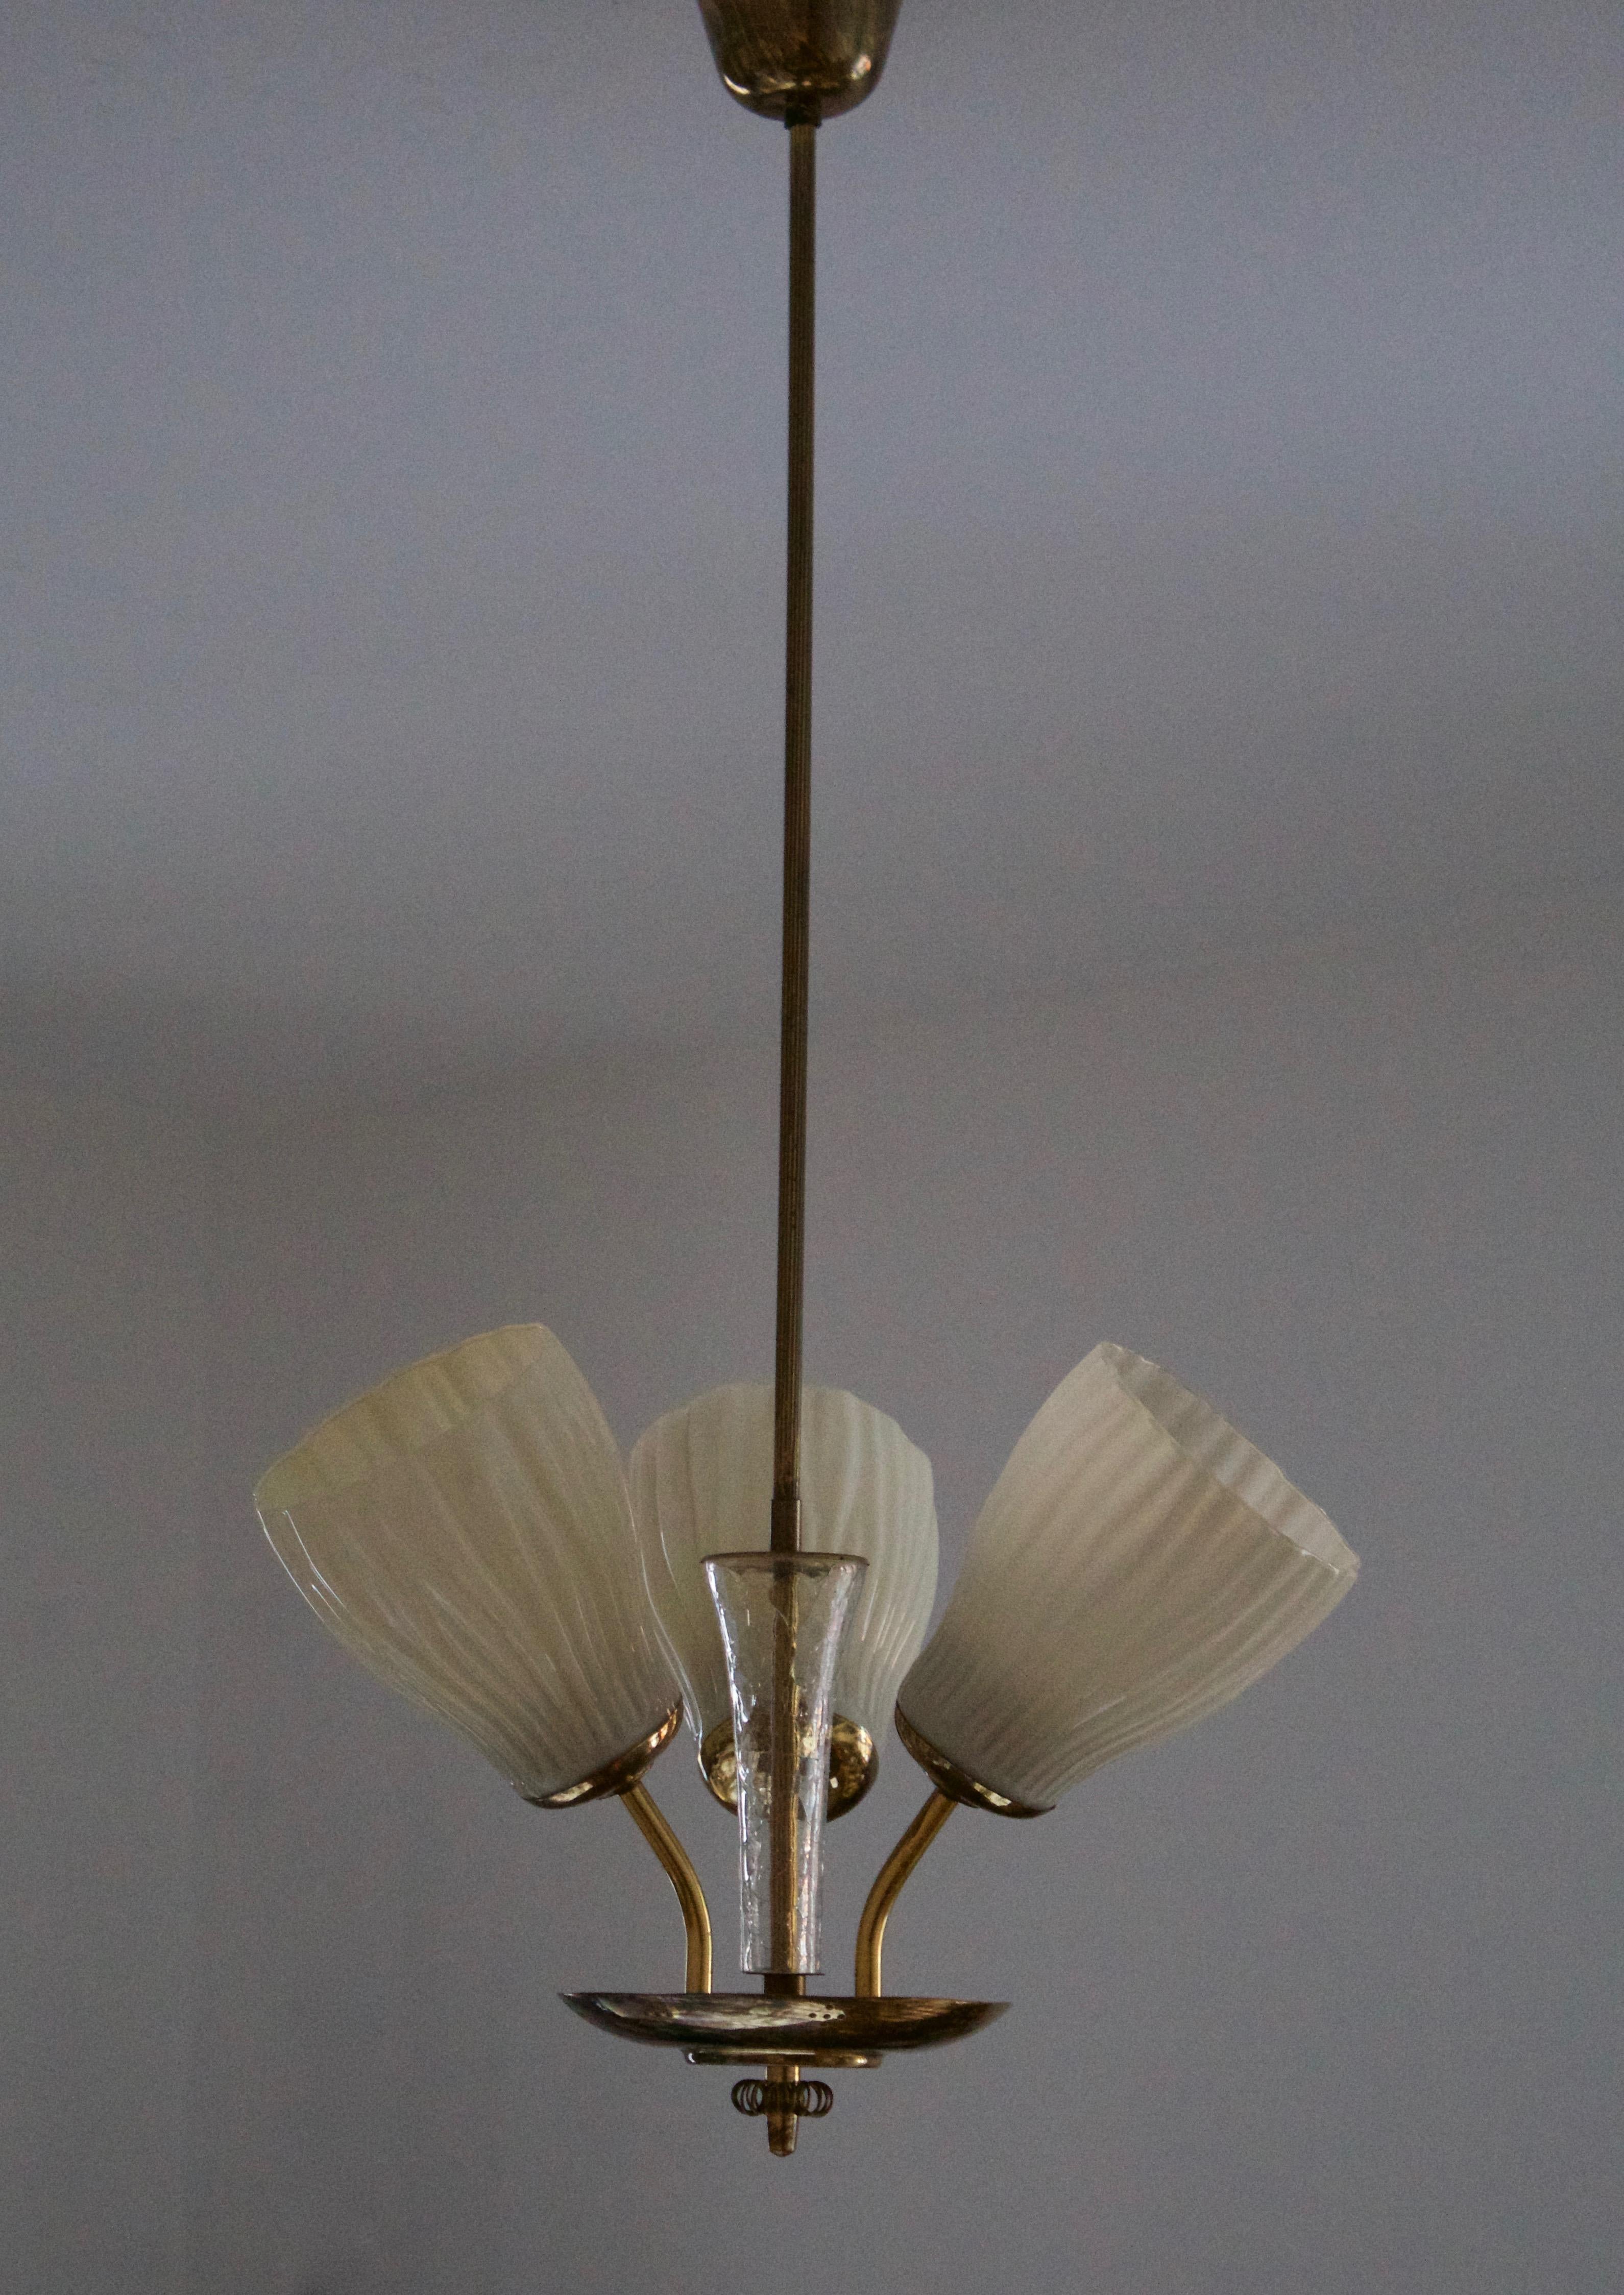 A chandelier light, designed and produced in Finland, 1940s. Features milk glass with organic ornamentation, blown glass, and finely detailed brass. 

Other designers of the period include Paavo Tynell, Alvar Aalto, Lisa Johansson-Pape, J.T.